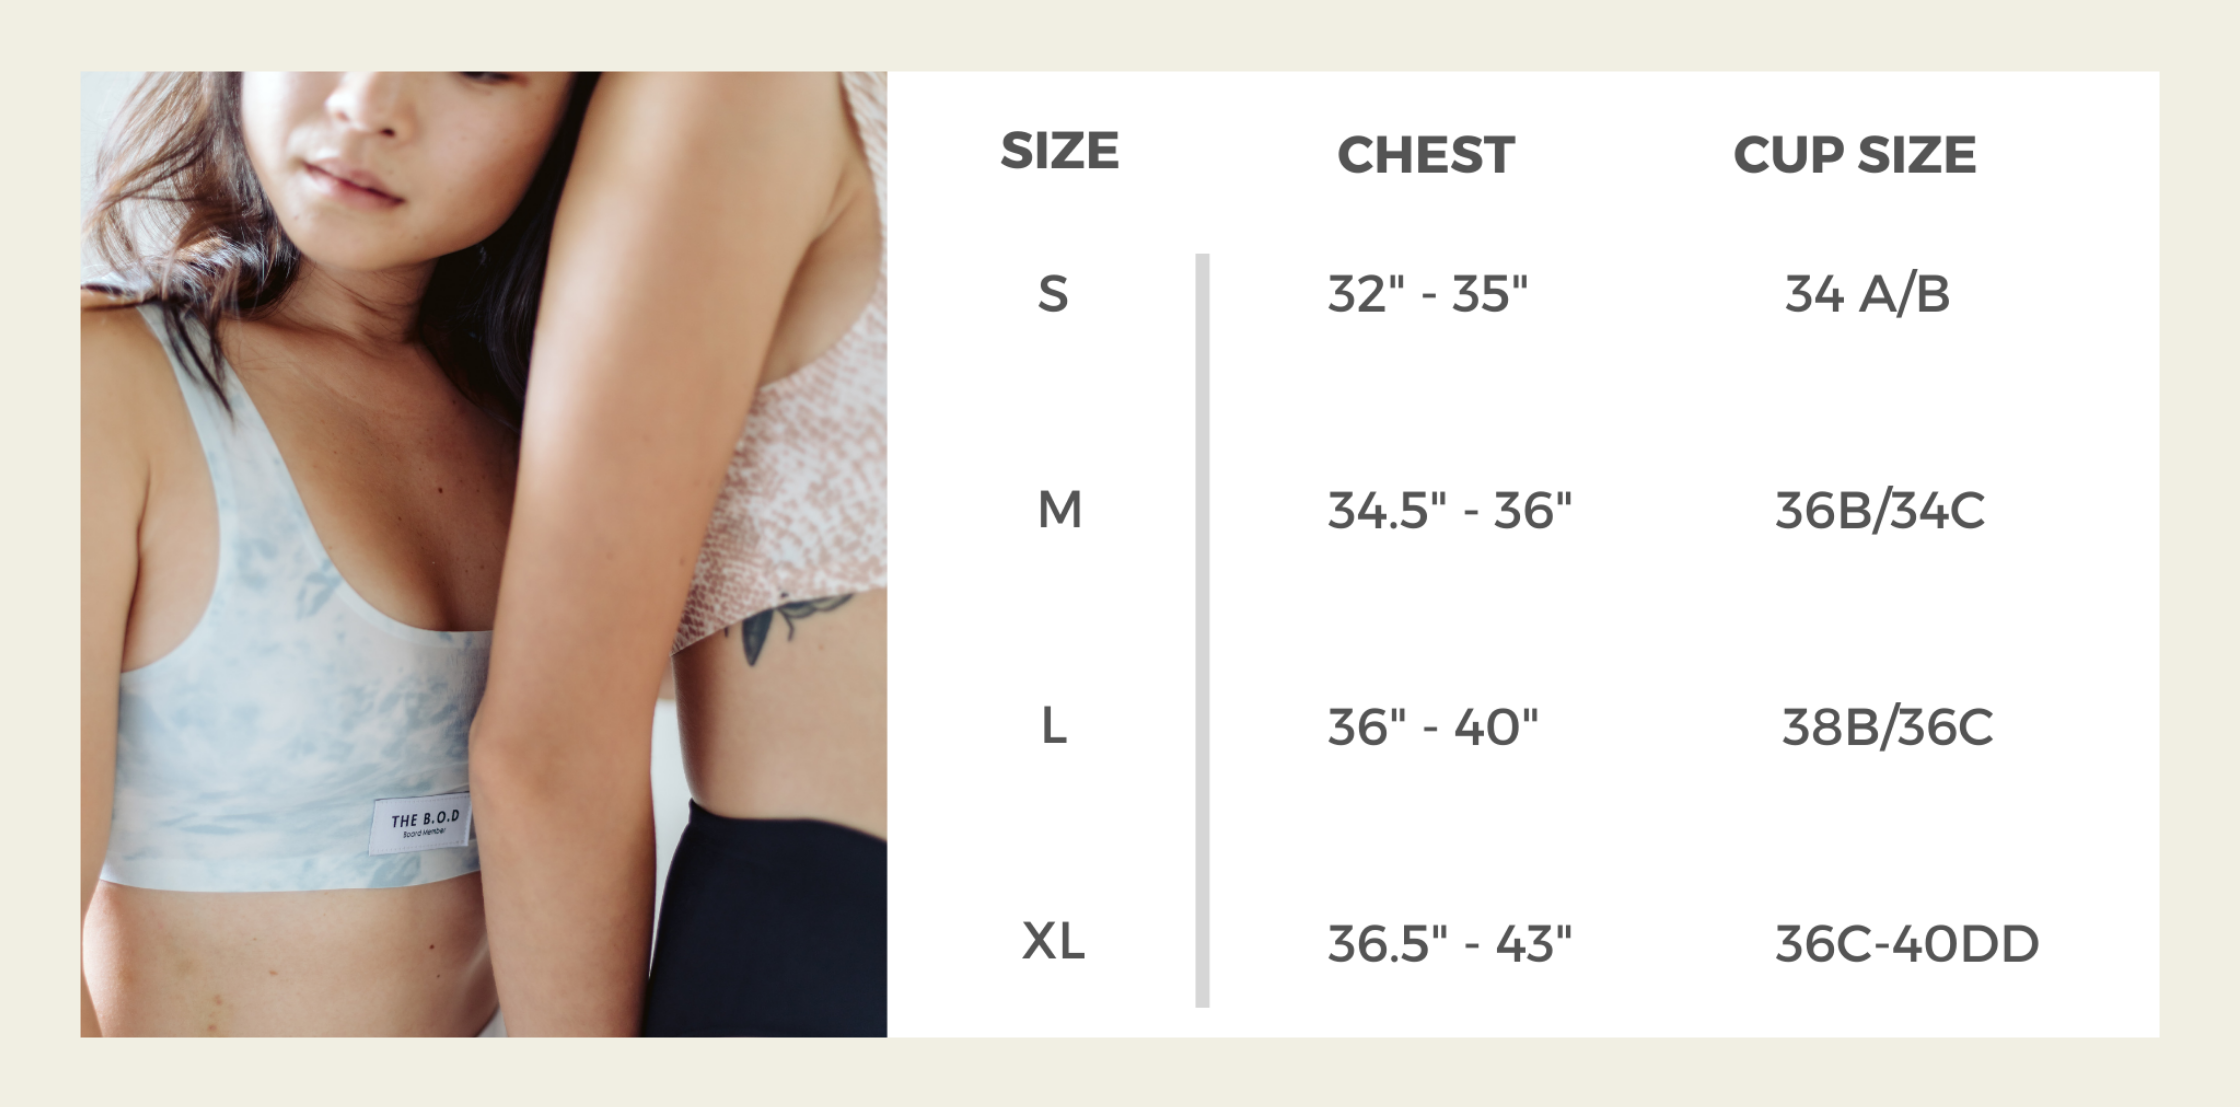 Bralette Size Guide – THE B.O.D